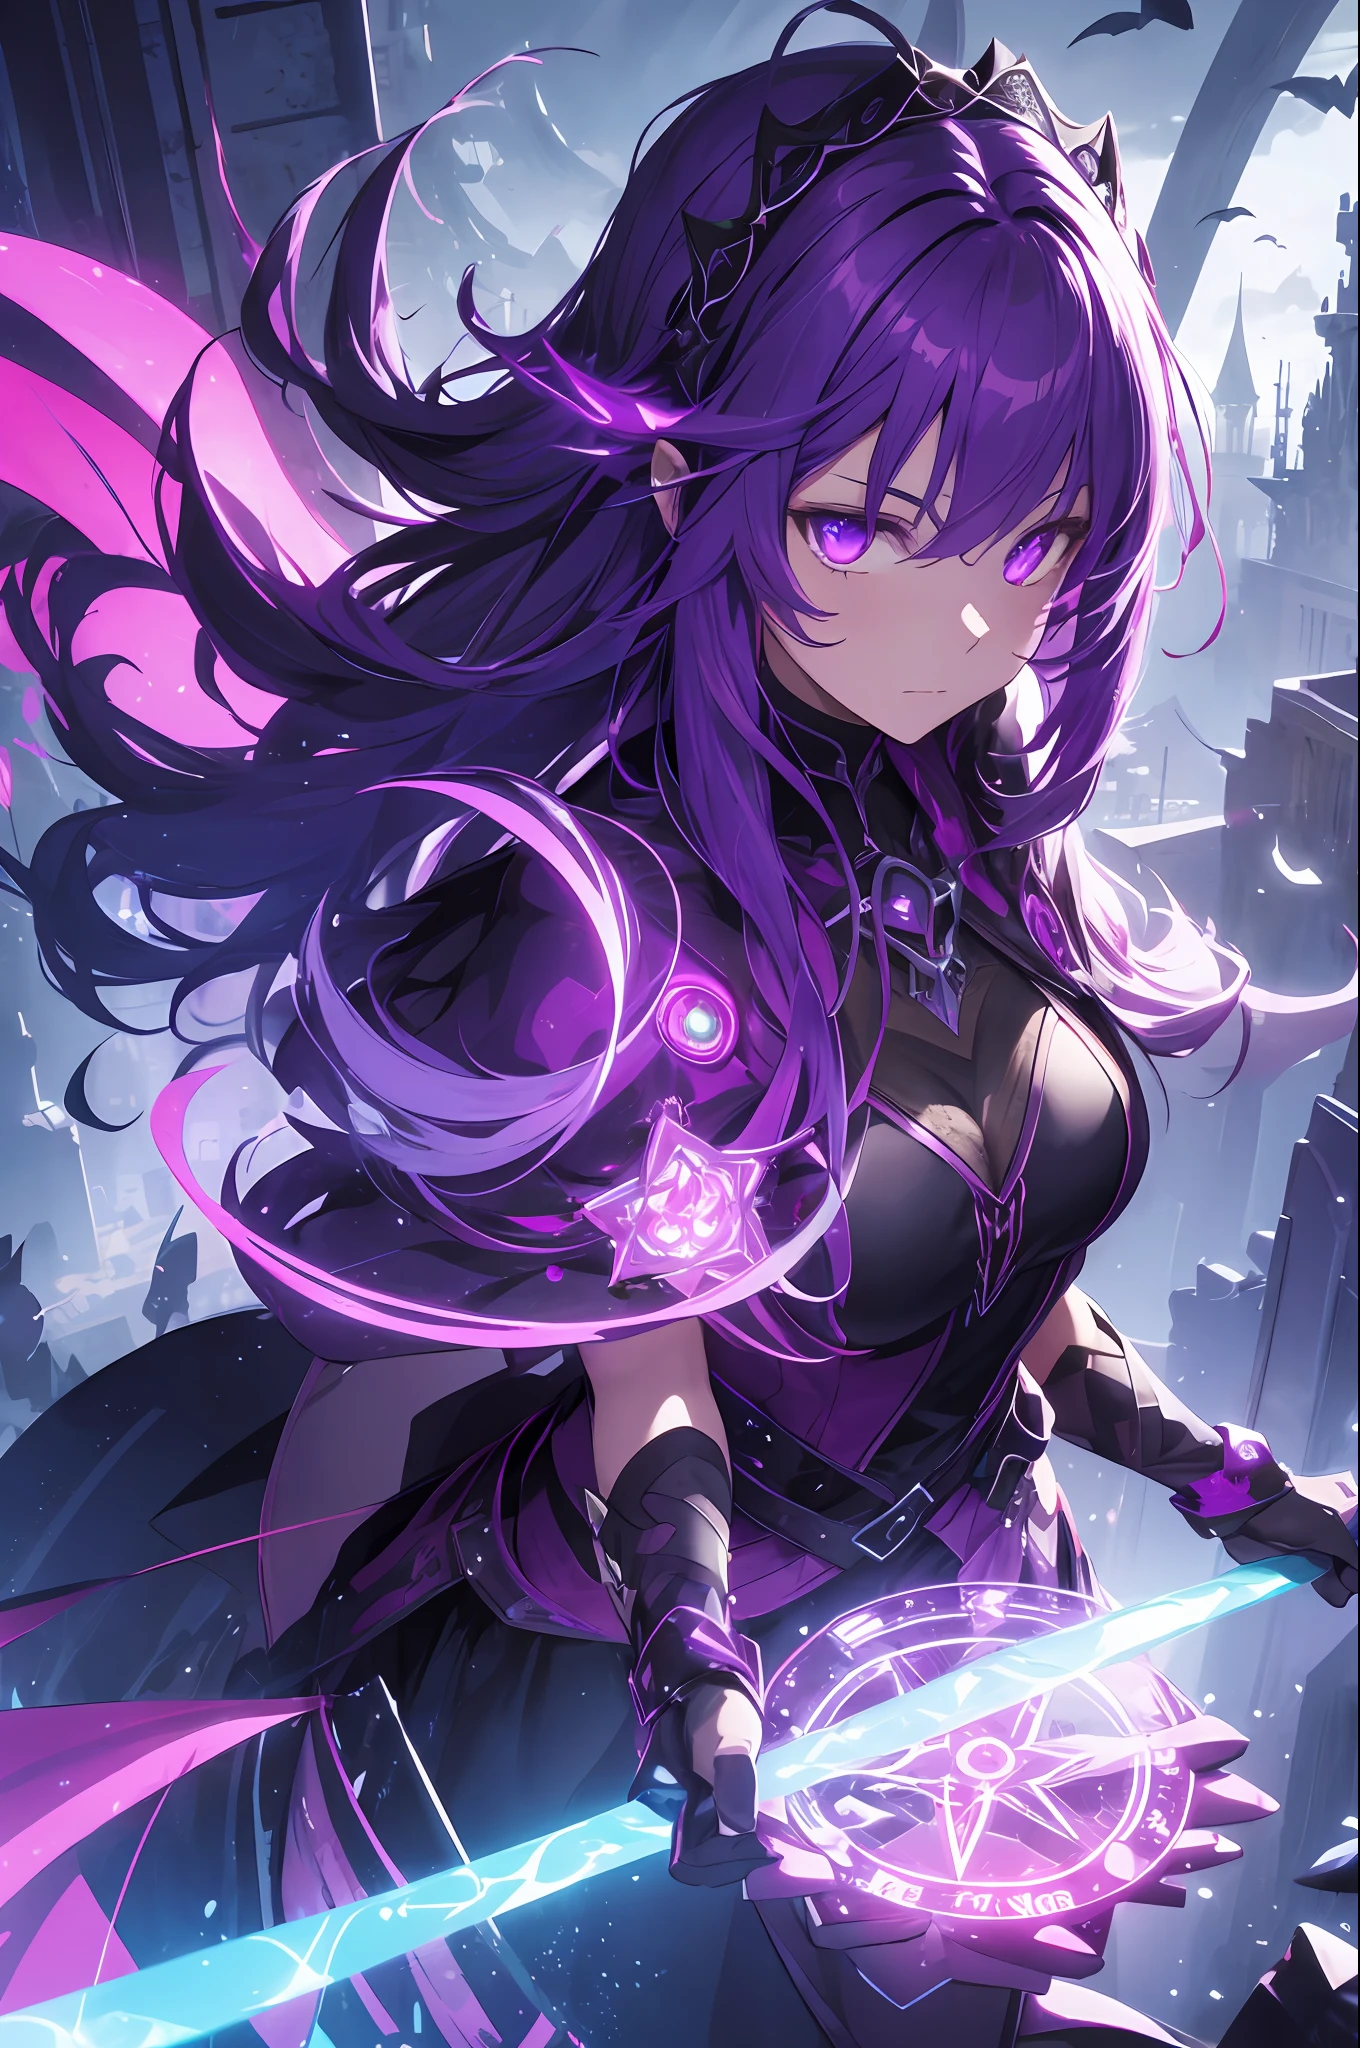 ((black dope outfit)), revealing, medium breasts, 30 years old, young beautiful girl, ultra detailed, official art, unity 8k wallpaper, BREAK, neon purple lighting, (vibrant glow):1.2, dynamic colors, striking contrast, futuristic vibe, electric energy, reflective surfaces, masterpiece, best quality, ultra-detailed, illustration, 1girl, solo, fantasy, flying, broom, night sky, outdoors, magic, spells, moon, stars, clouds, wind, hair, cape, hat, boots, broomstick, glowing, mysterious, enchanting, whimsical, playful, adventurous, , wonder, imagination, determination, skill, speed, movement, energy, realism, naturalistic, figurative, representational, beauty, fantasy culture, mythology, fairy tales, folklore, legends, witches, wizards, magical creatures, fantasy worlds, composition, scale, foreground, middle ground, background, perspective, light, color, texture, detail, beauty, wonder, adult, 30 years old, loraeyes, pauldrons, magic circle, evil, vampire teeth, 30 years old, adult, magic circle, magic_circle, red_glow, red glow, (masterpiece, best quality, ultra-detailed, best shadow), (detailed background,dark fantasy), (beautiful detailed face), high contrast, (best illumination, an extremely delicate and beautiful), ((cinematic light)), colorful, hyper detail, dramatic light, intricate details, (1 girl, solo, purple glowing hair, sharp face, long braided hair, purple glowing eyes, hair between eyes, dynamic angle, magic circle), blood splatter, swirling black light around the character, depth of field, black light particles, (broken glass),, 30 years old, beautiful girl, ultra detailed, official art, unity 8k wallpaper, BREAK, neon lighting, (vibrant glow):1.2, dynamic colors, striking contrast, futuristic vibe, electric energy, reflective surfaces